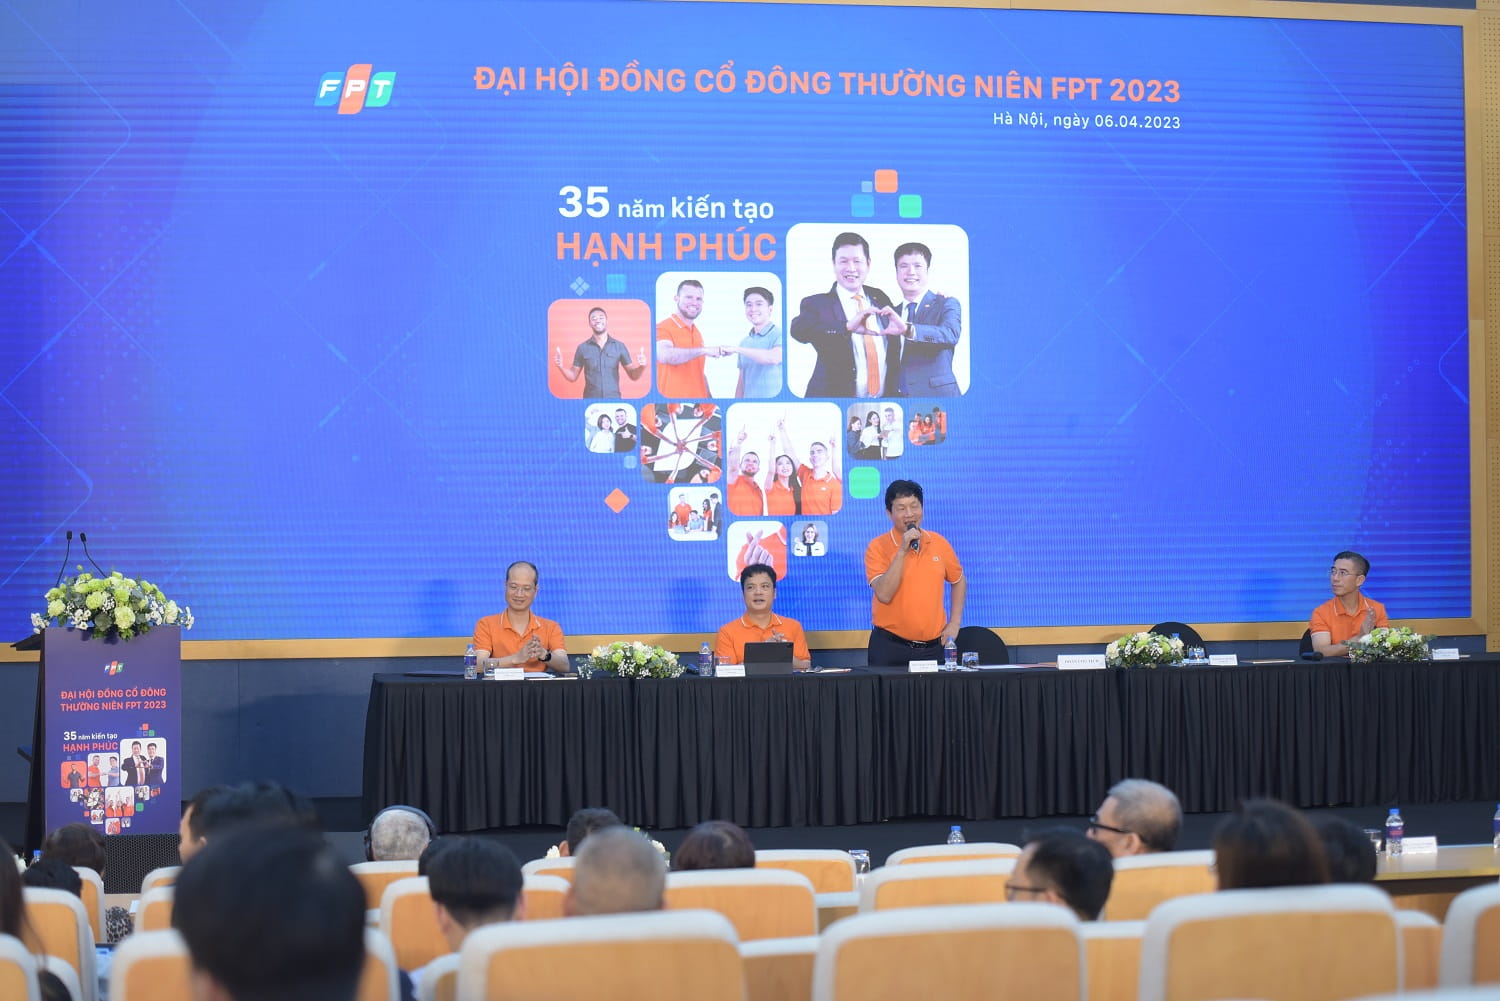 FPT's 2023 Annual General Meeting of Shareholders (AGM) was held in a hybrid format on April 6, 2023